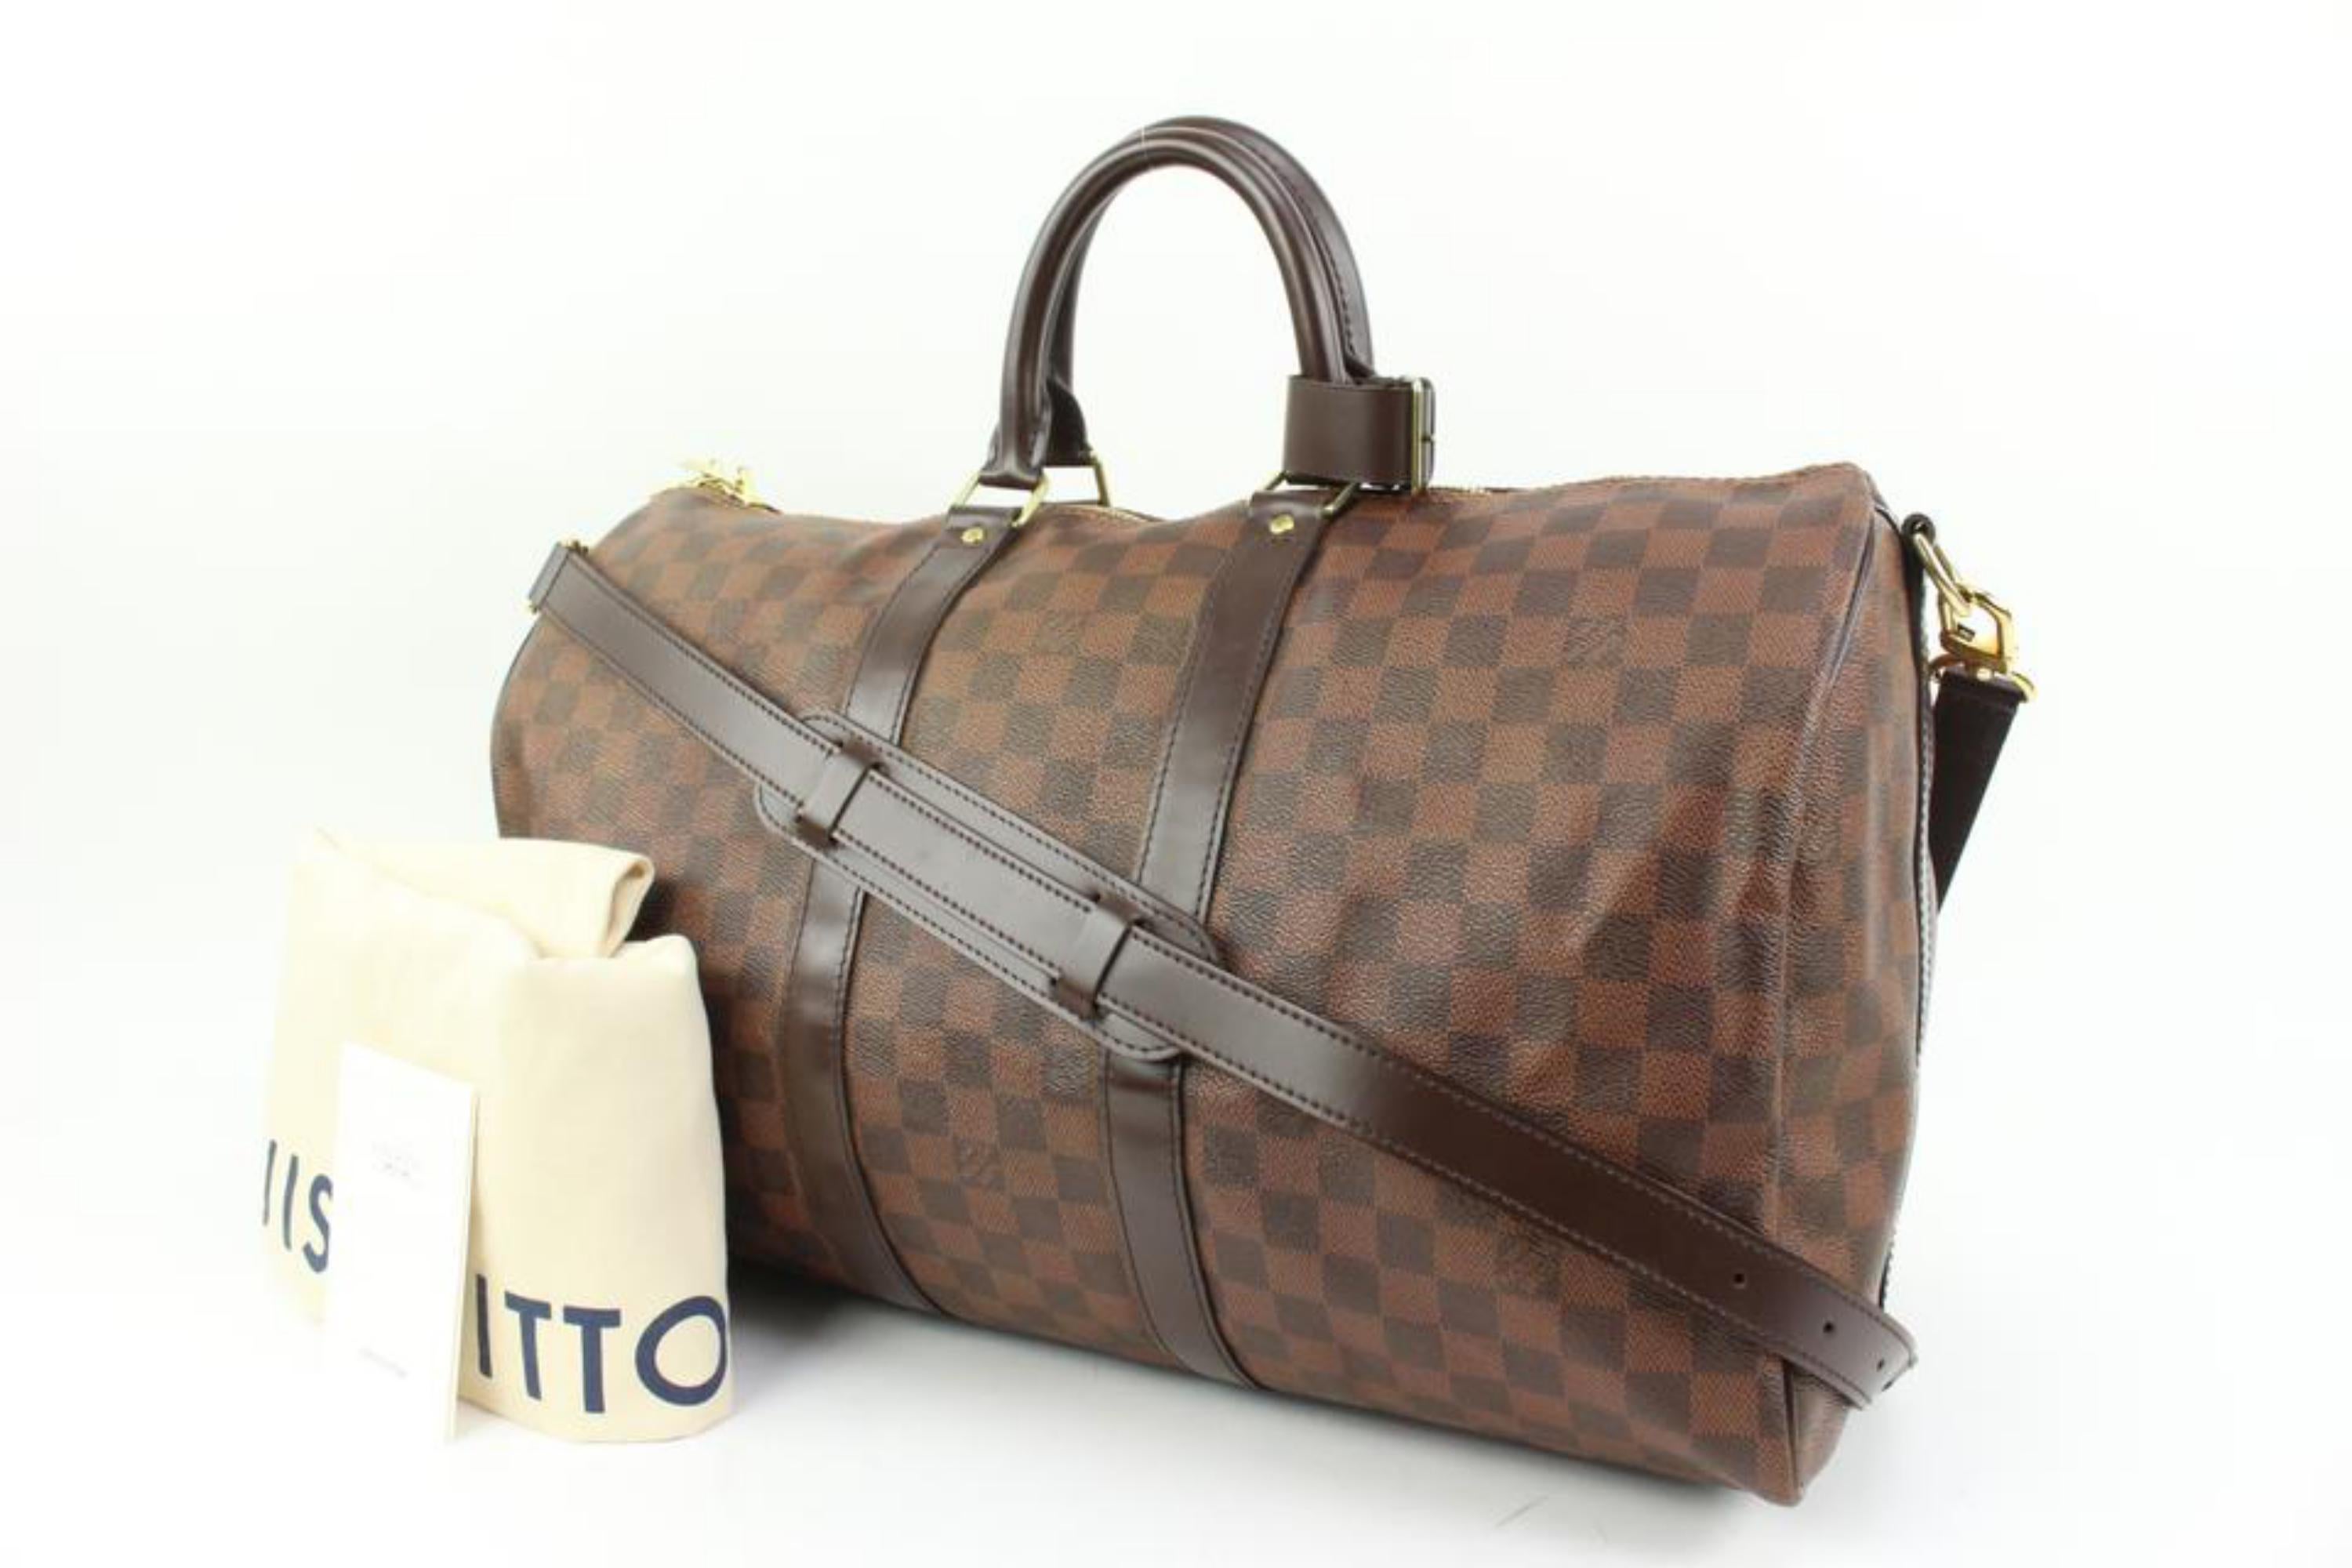 Louis Vuitton Damier Ebene Keepall Bandouliere 45 Duffle Bag with Strap 63lv315s
Date Code/Serial Number: MB4177
Made In: France
Measurements: Length:  18